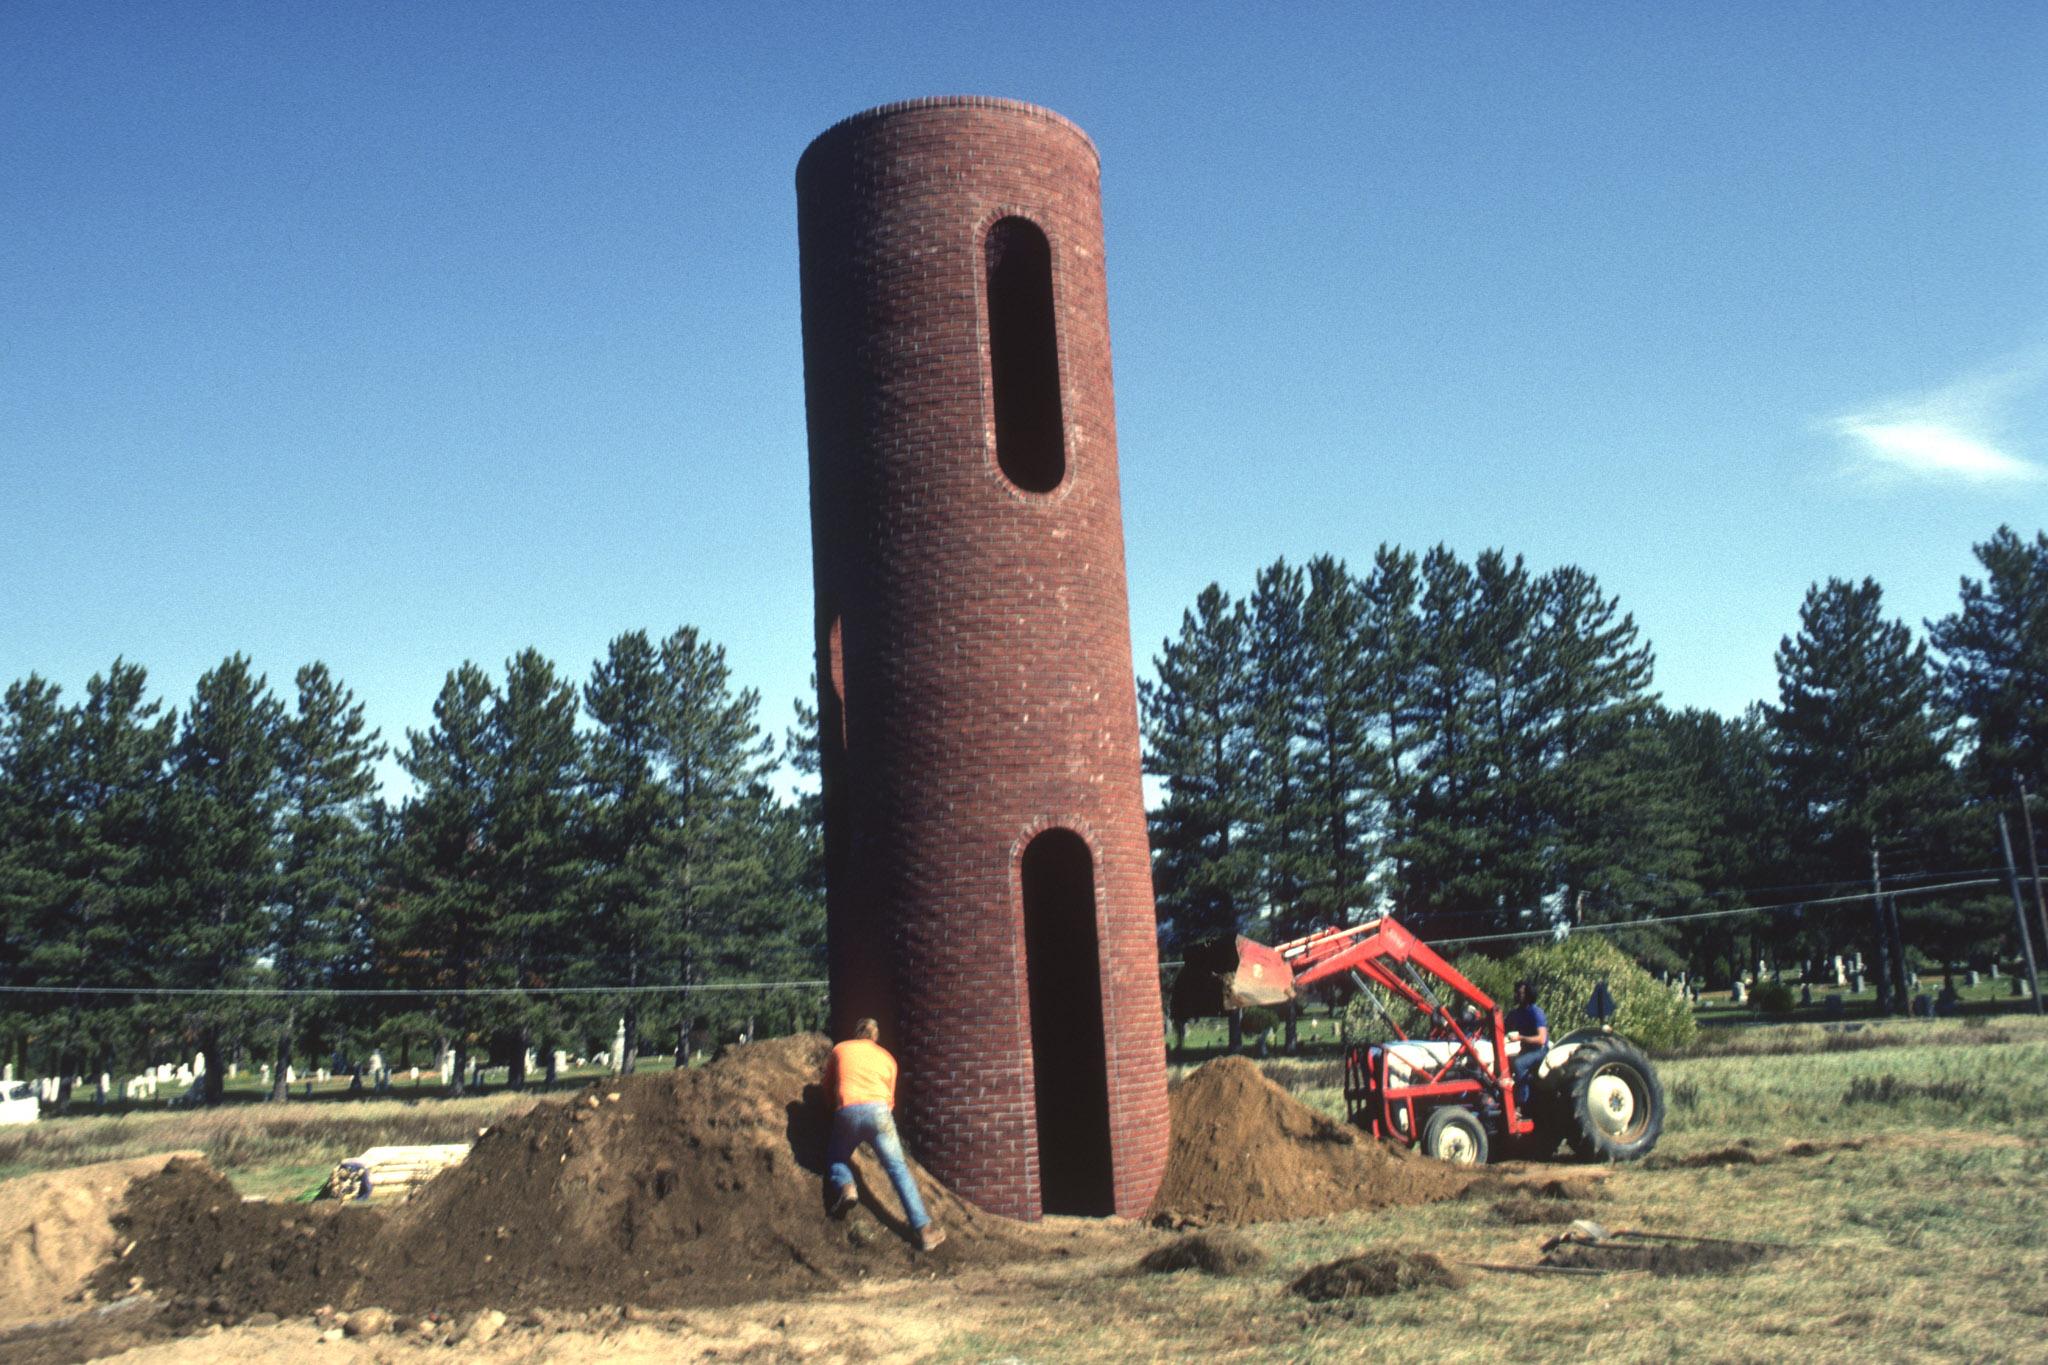 construction of a large cylindrical tower made using brick and two workers piling dirt around the base